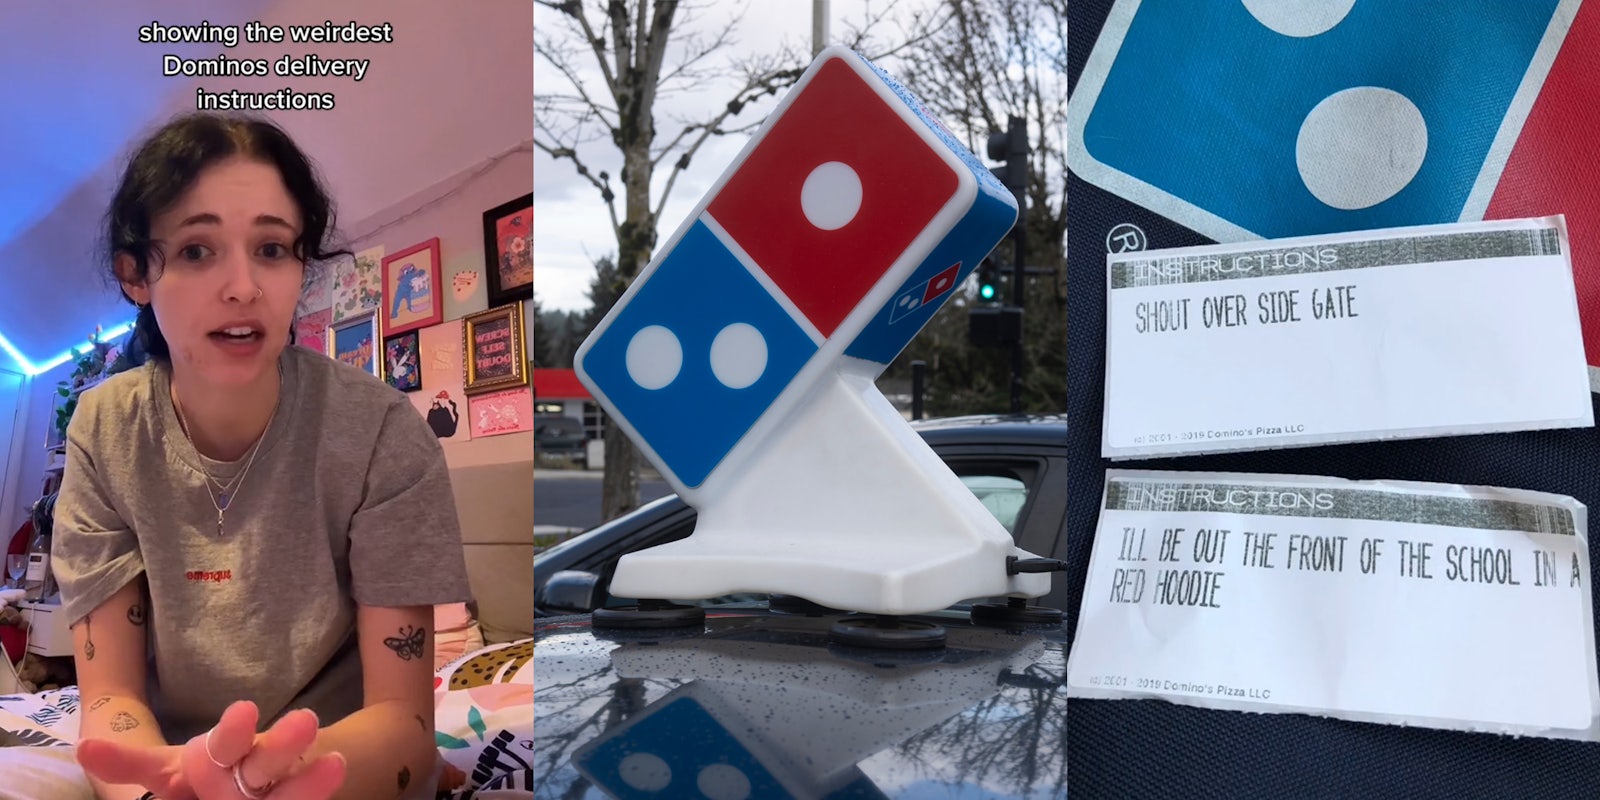 Domino's employee speaking caption 'showing the weirdest Dominos delivery instructions' (l) Domino's delivery car topper (c) delivery instructions on small papers 'SHOUT OVER SIDE GATE' 'ILL BE OUT THE FRONT OF THE SCHOOL IN A RED HOODIE' (r)